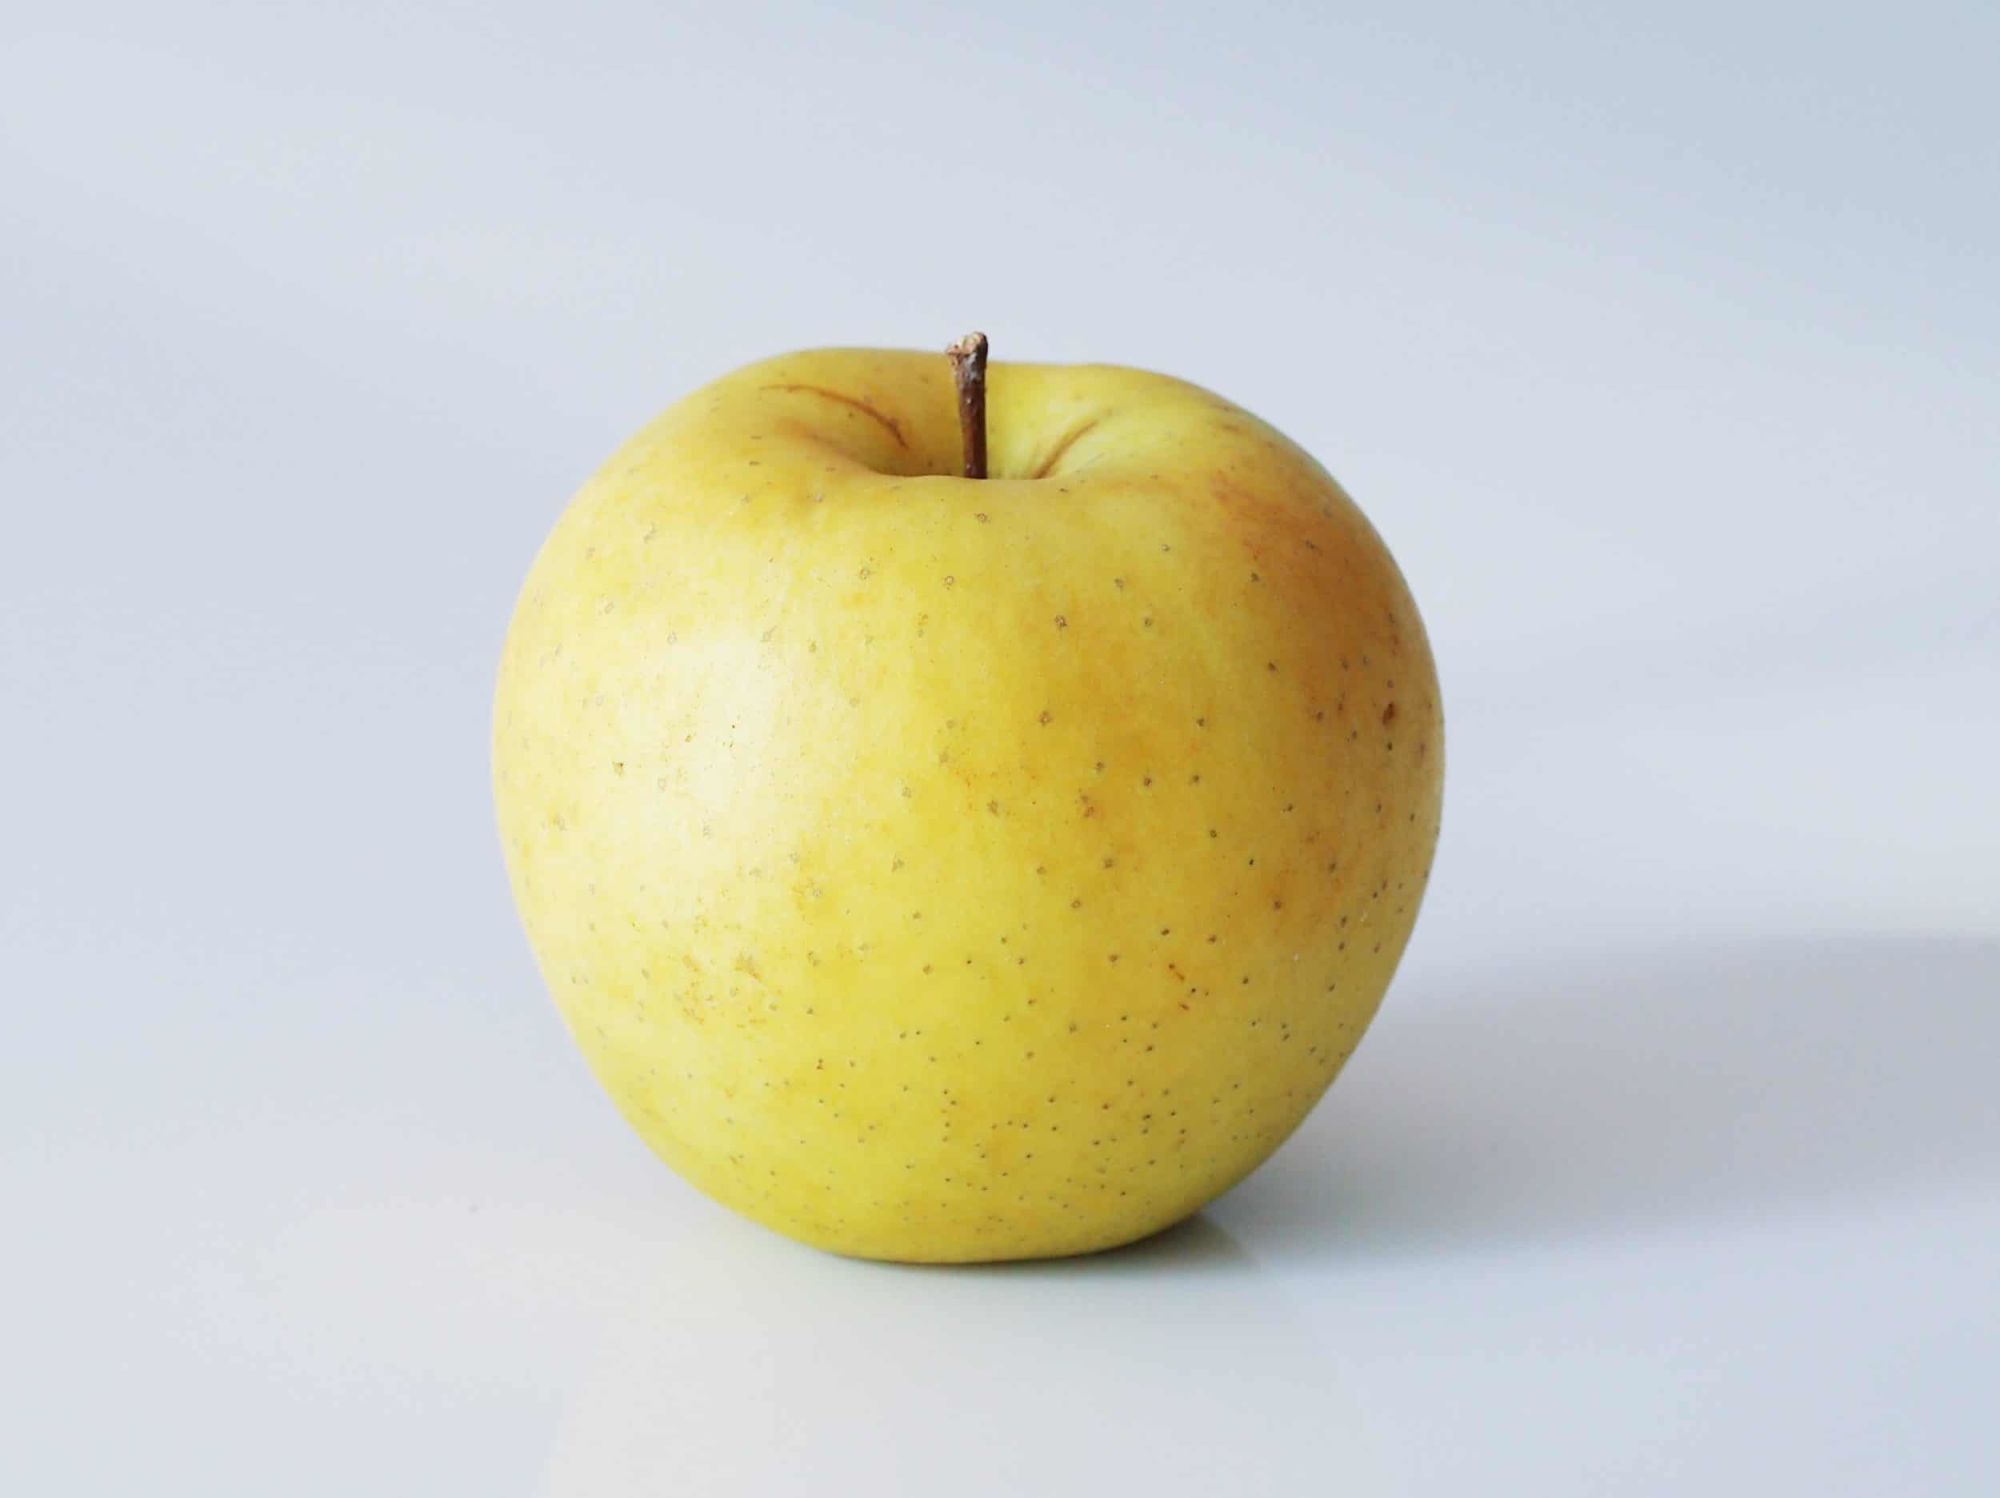 The Best Apples for Juicing (18 Varieties to Try!)